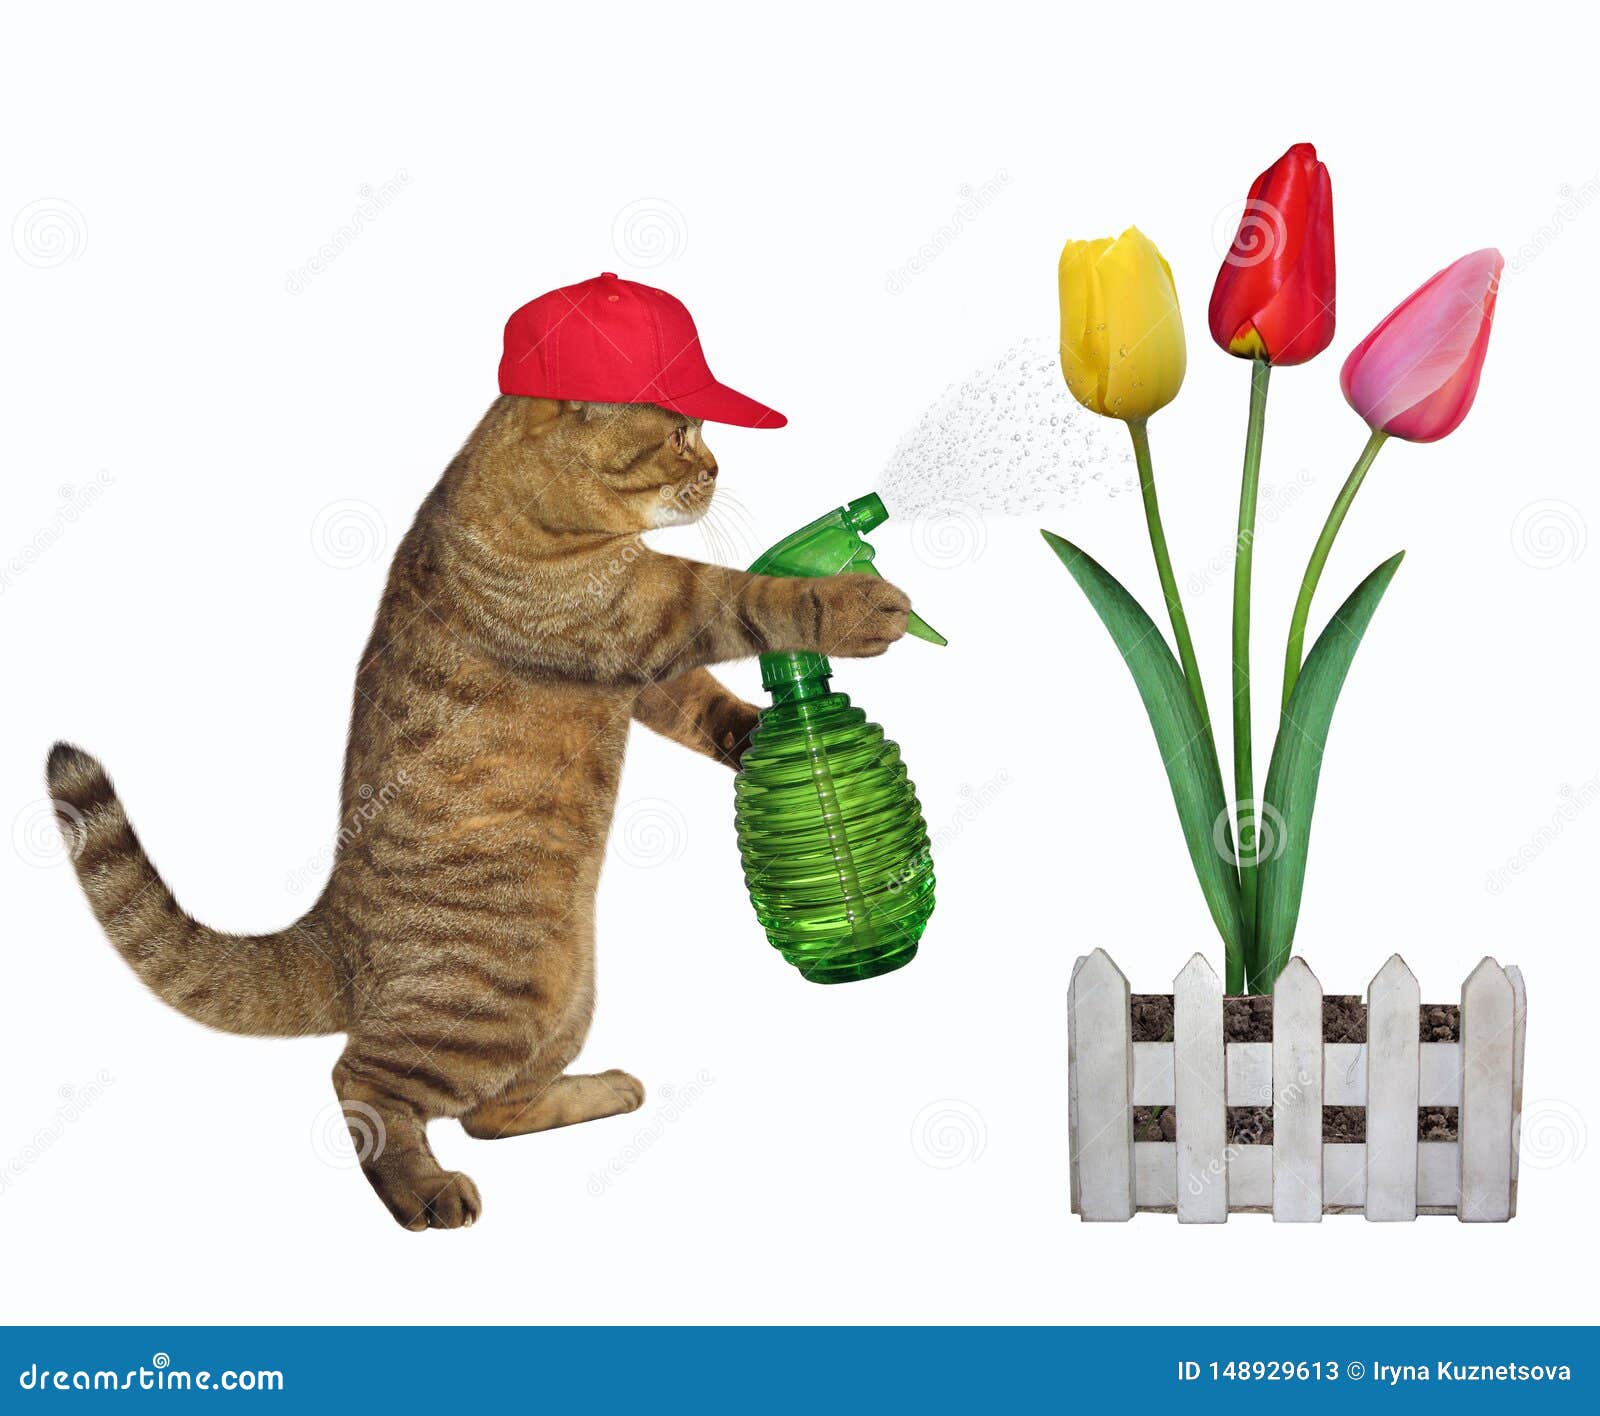 Cat Spraying Water On Colored Tulips 2 Stock Image Image of funny